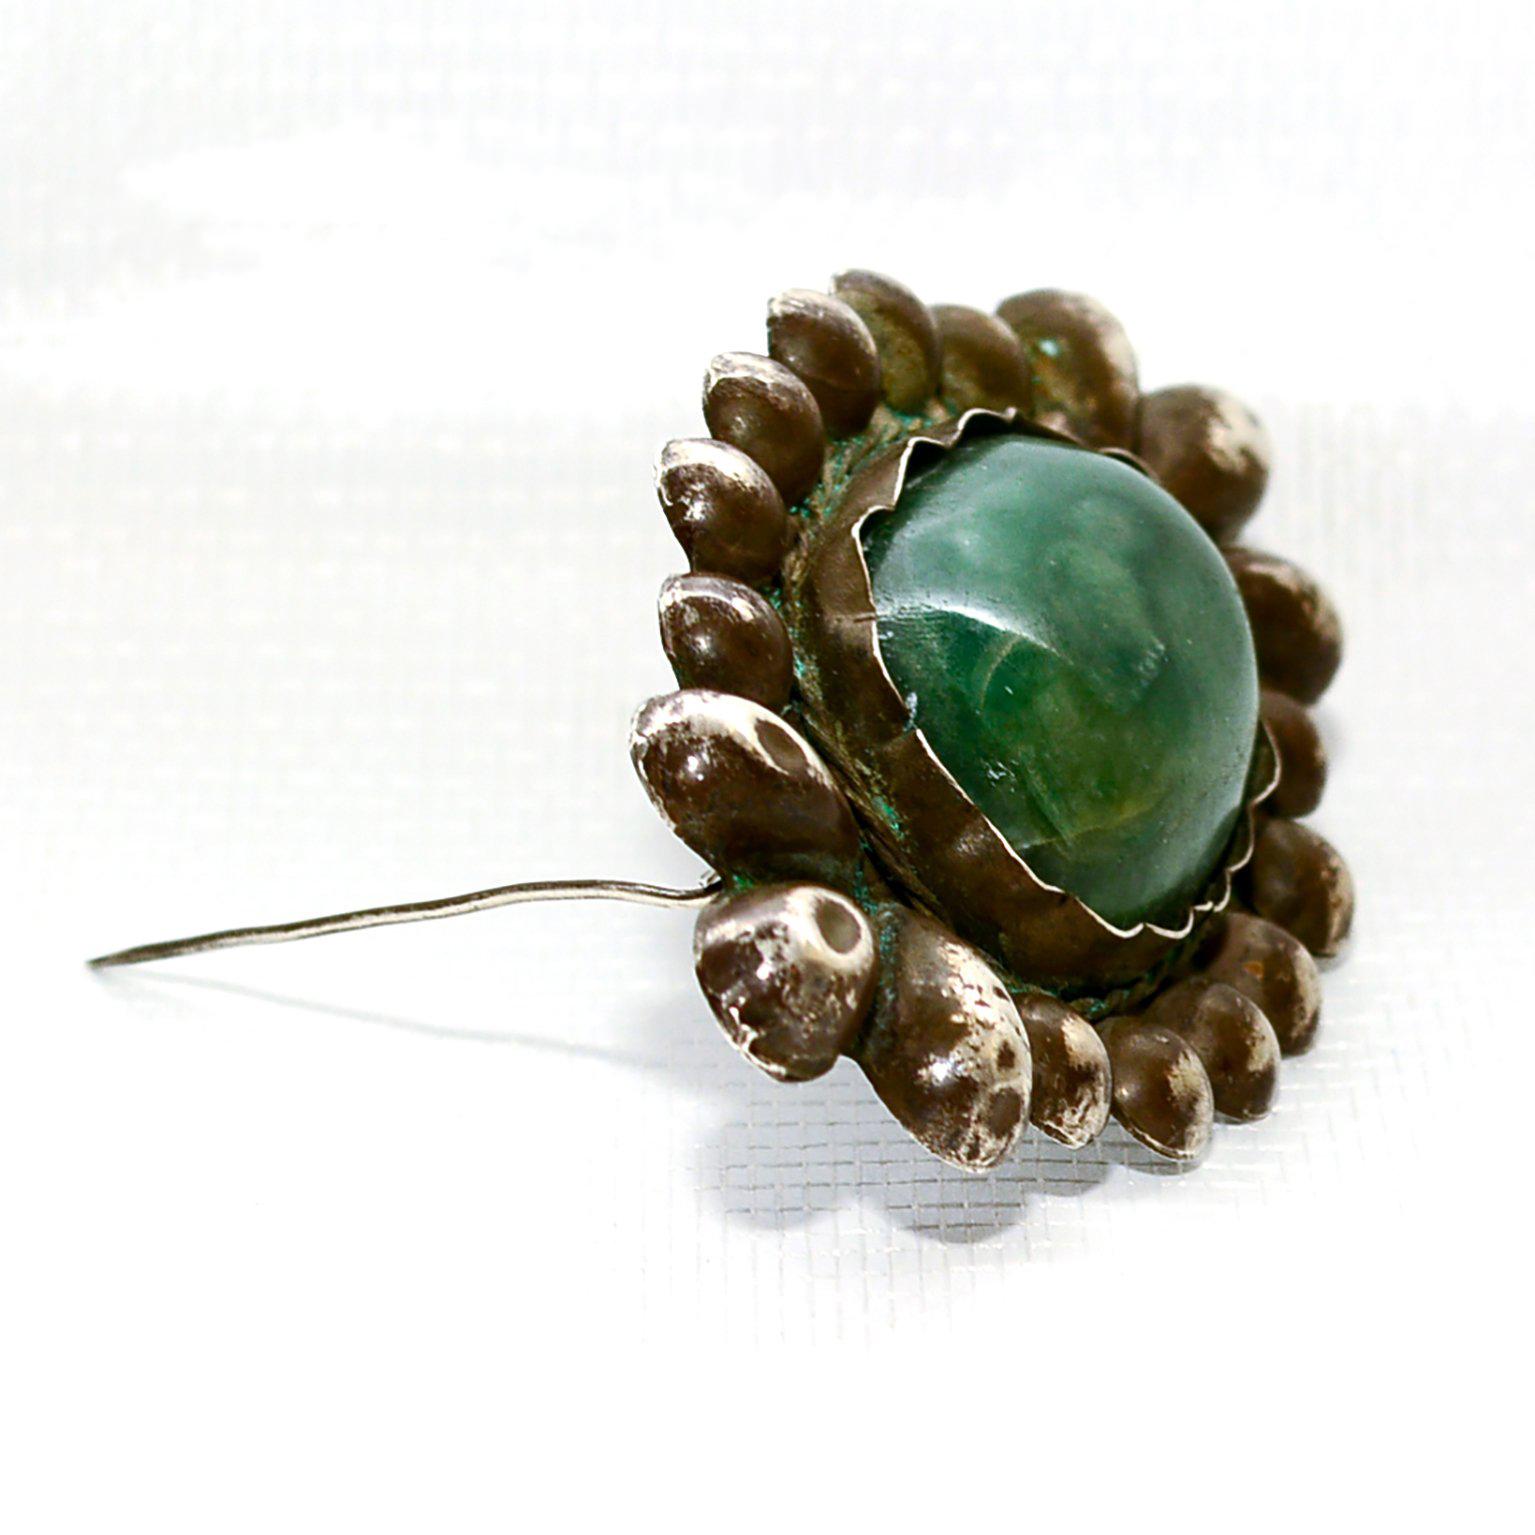 Rare William Spratling Brooch Sterling Silver with Mexican Cabochon Jade 3